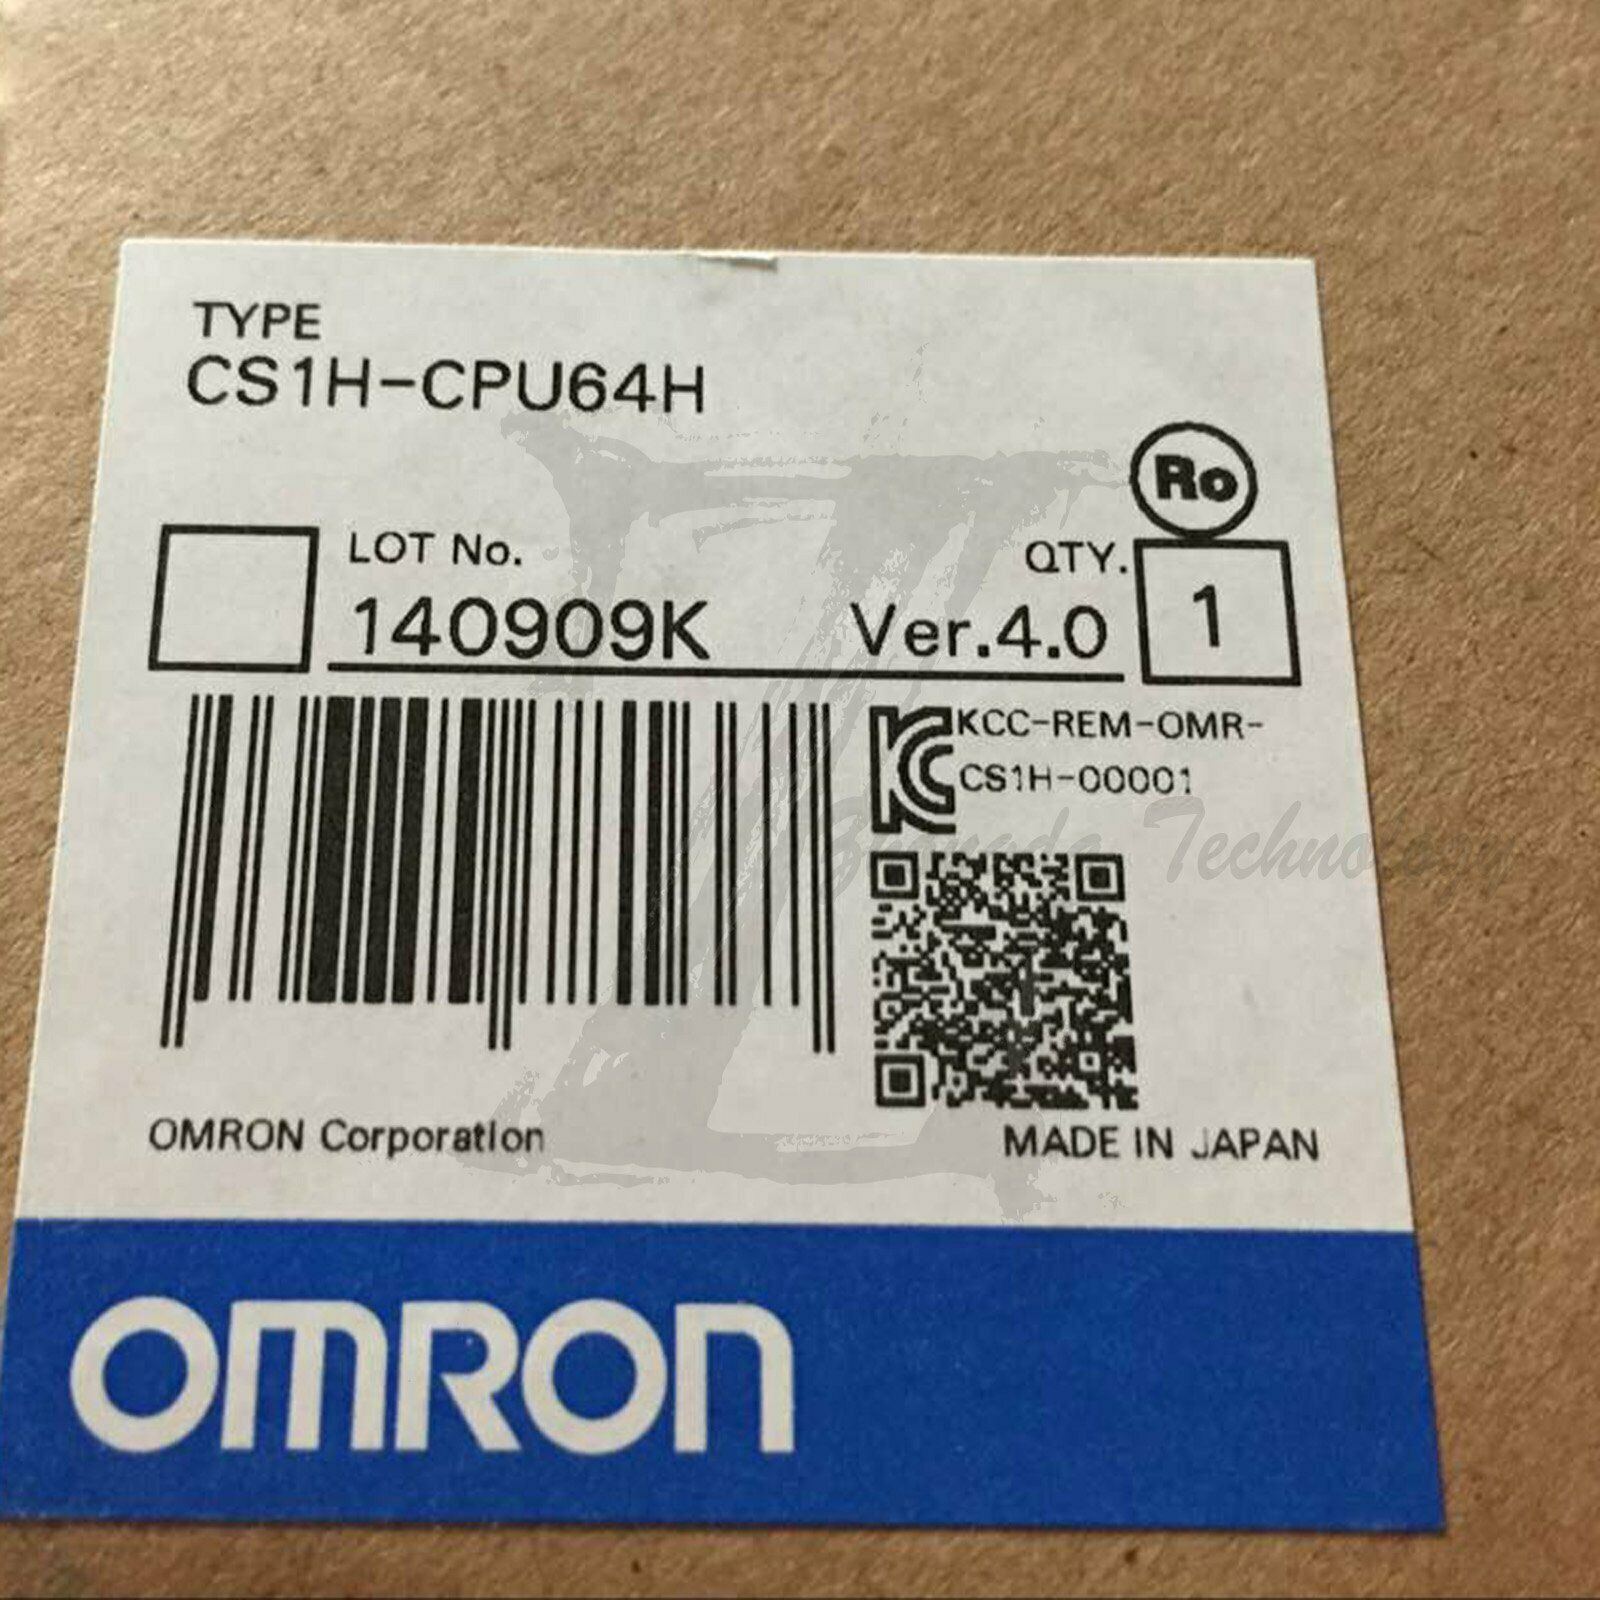 1pc new Omron CS1H-CPU64H module one year warranty KOEED 500+, 80%, import_2020_10_10_031751, Omron, Other